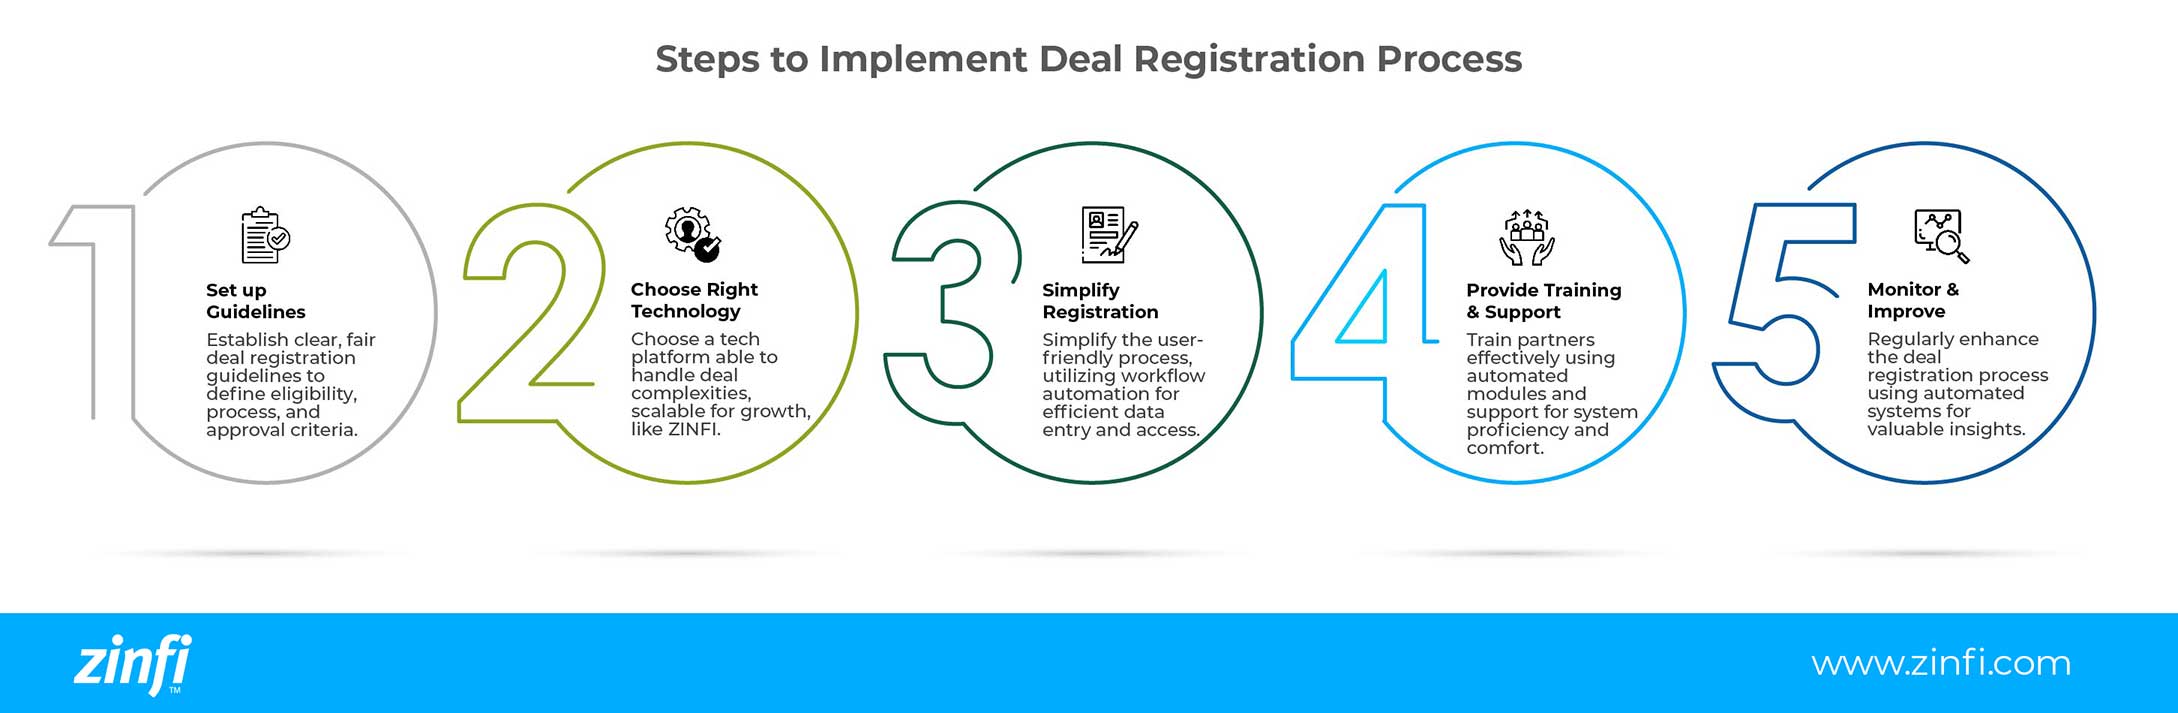 Infographic to Show Steps to Implement Deal Registration Process